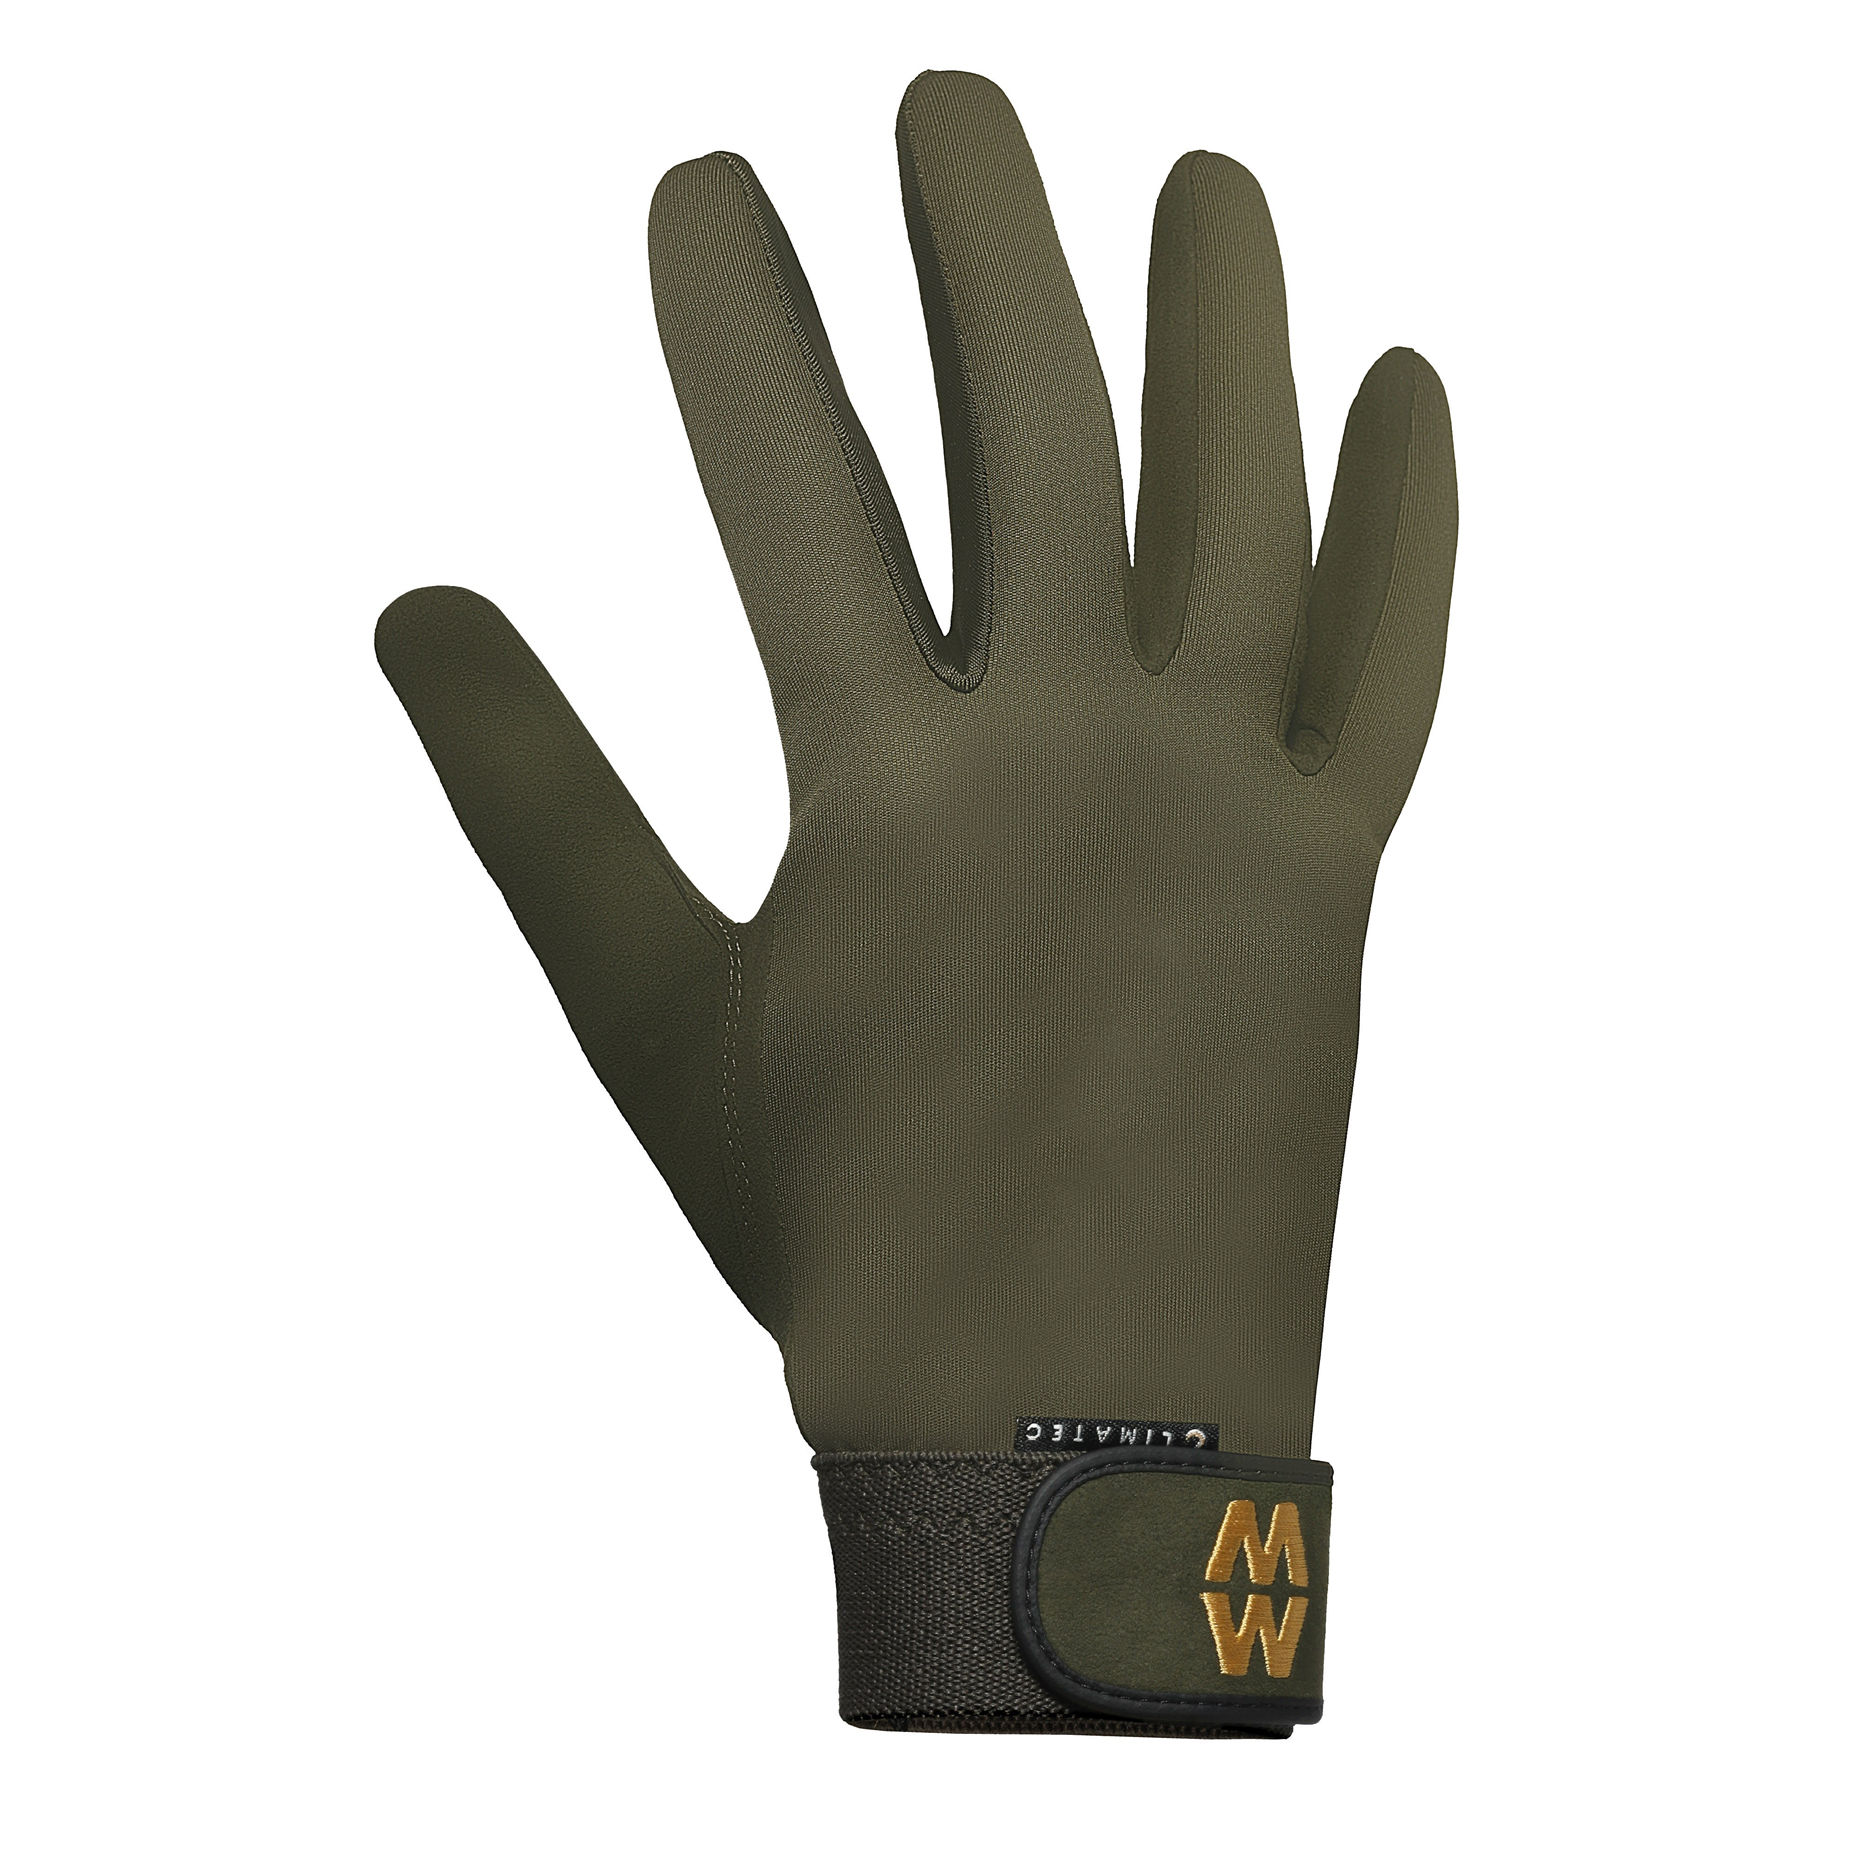 Macwet Climatec total grip Gloves - Long cuff - Green Size 7.5 - official  stockist